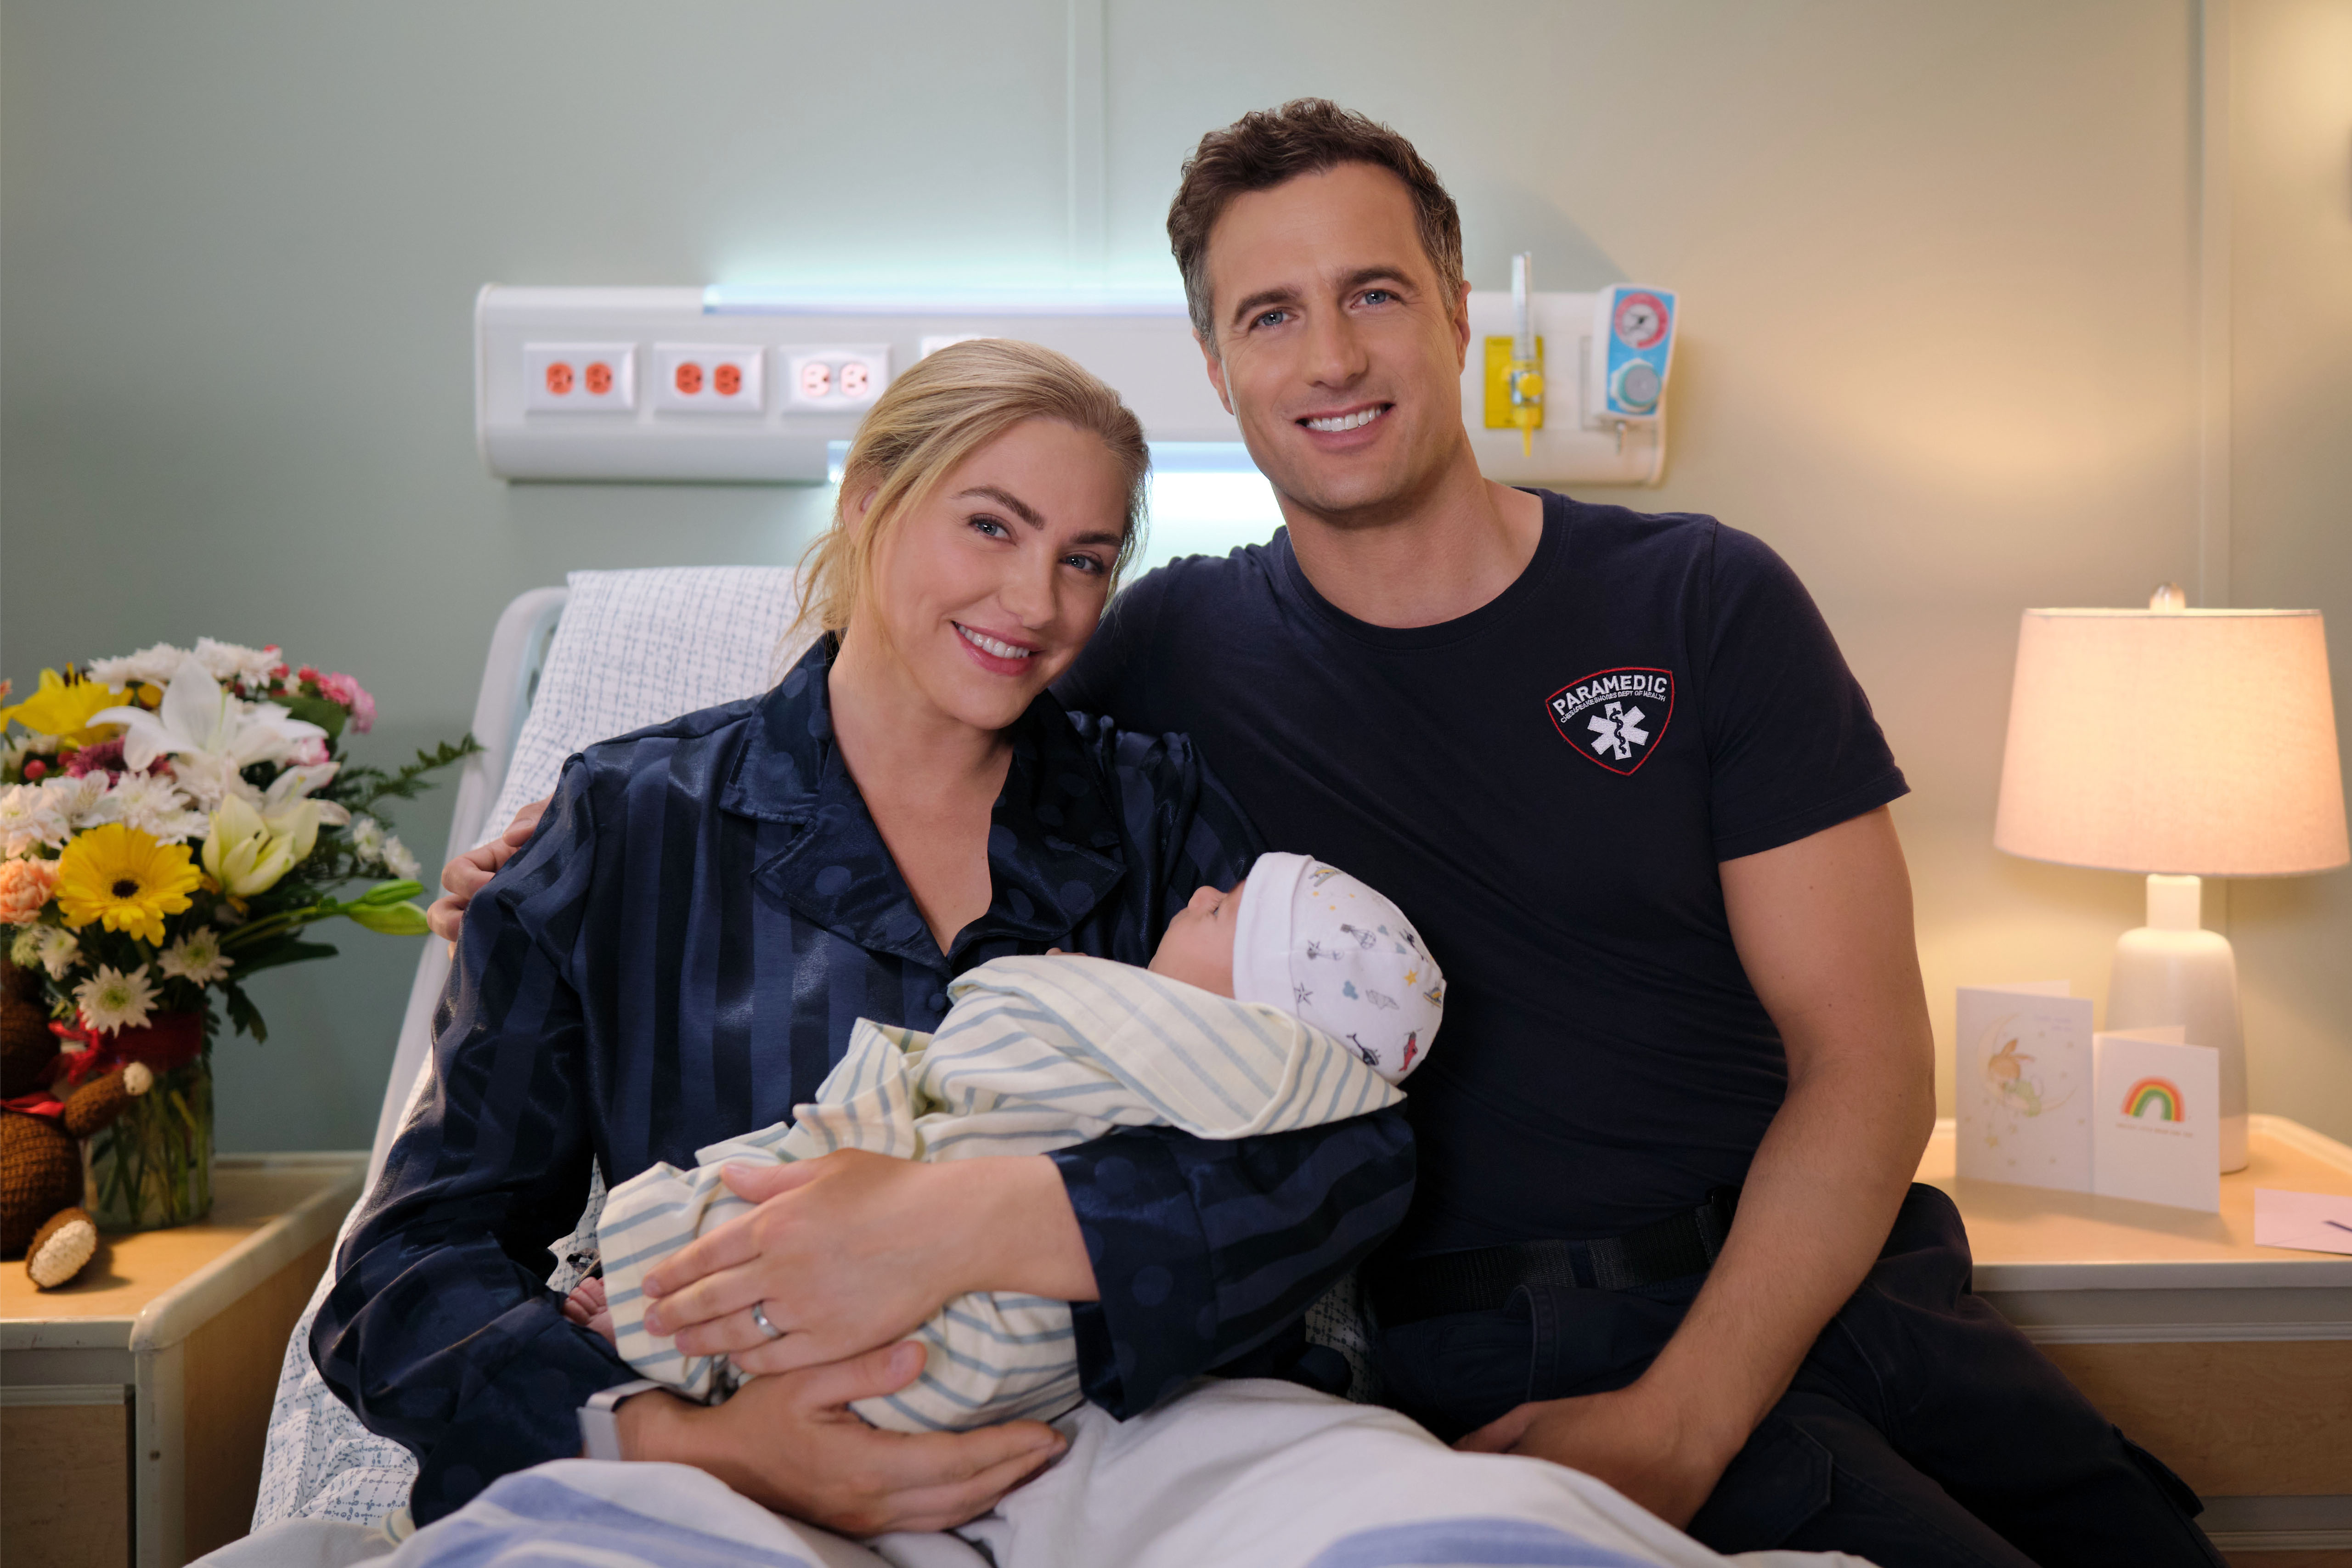 'Chesapeake Shores' There Was 'An Air of Pregnancy on the Set' During